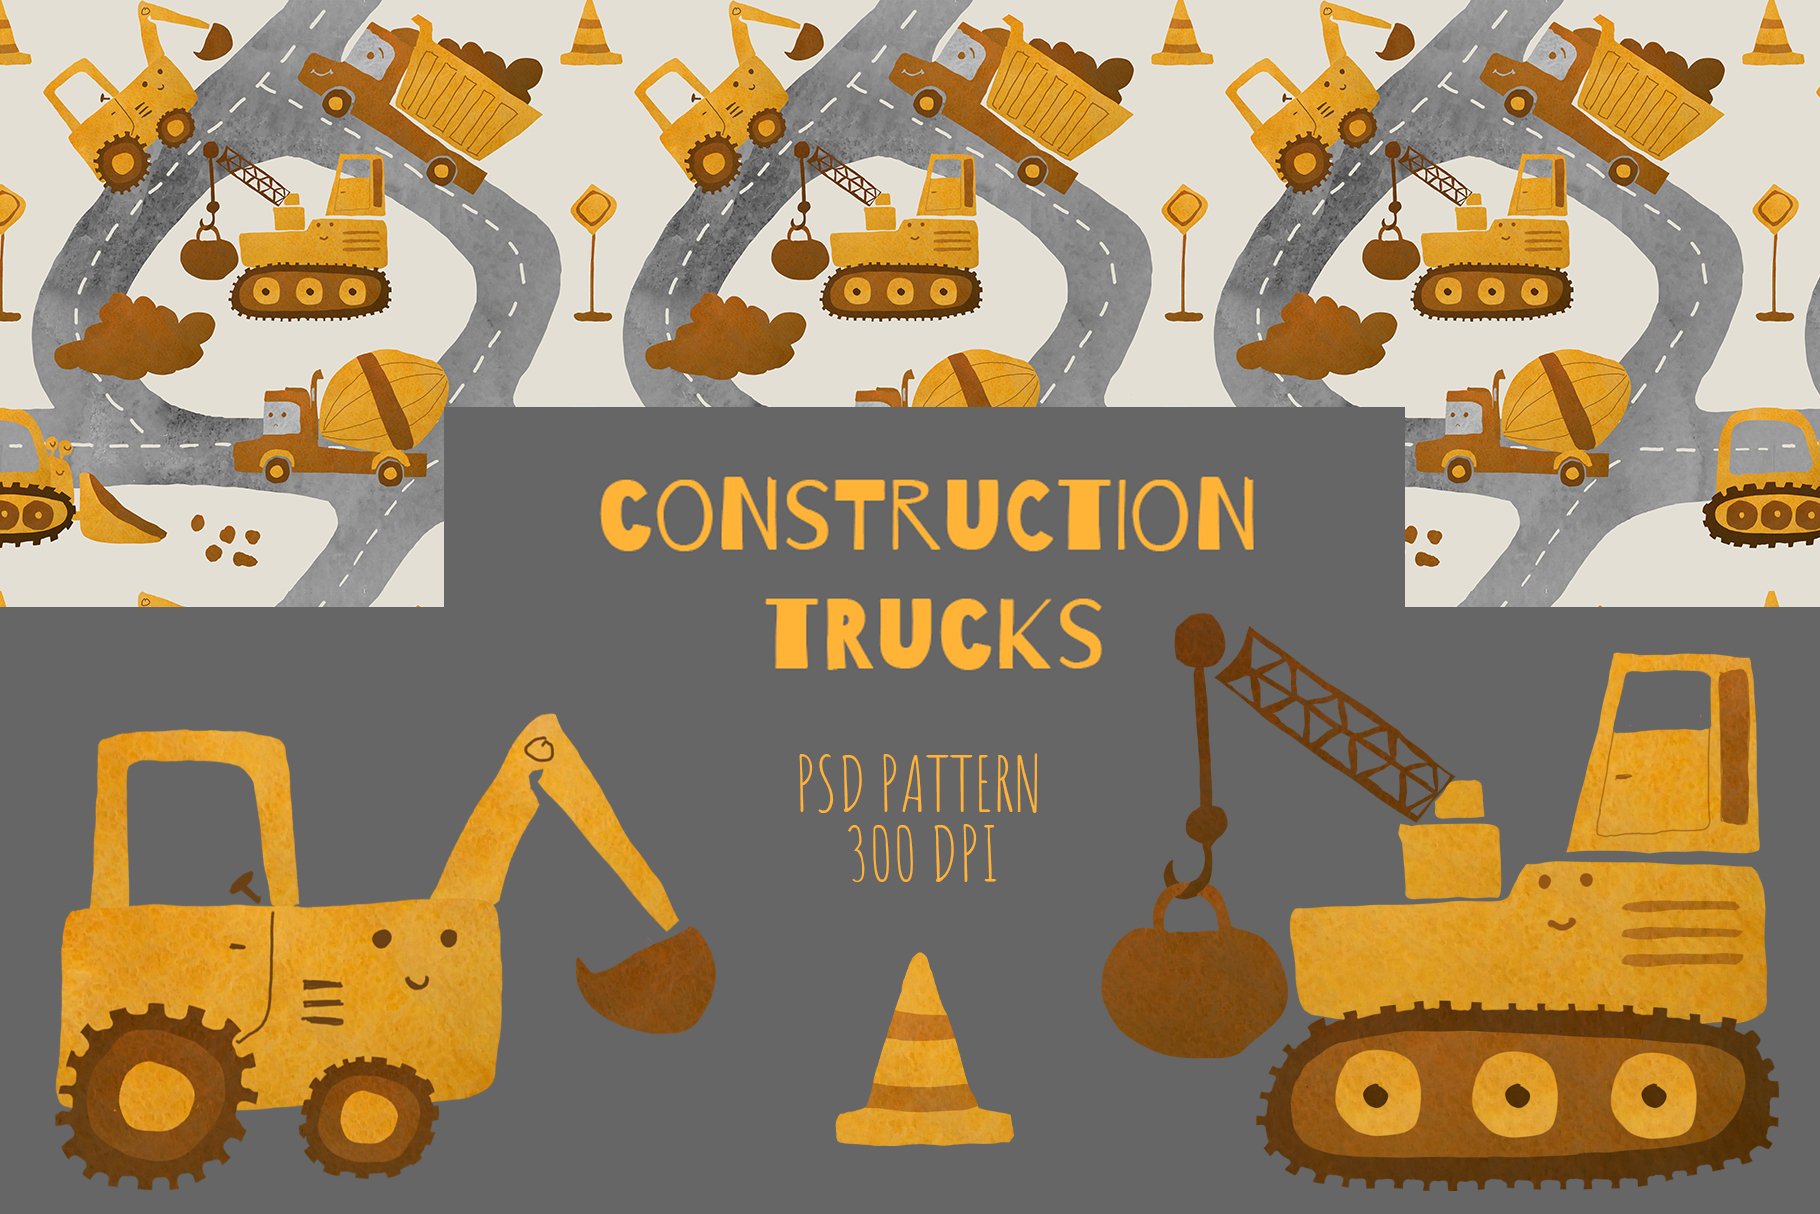 Construction trucks patterns cover image.